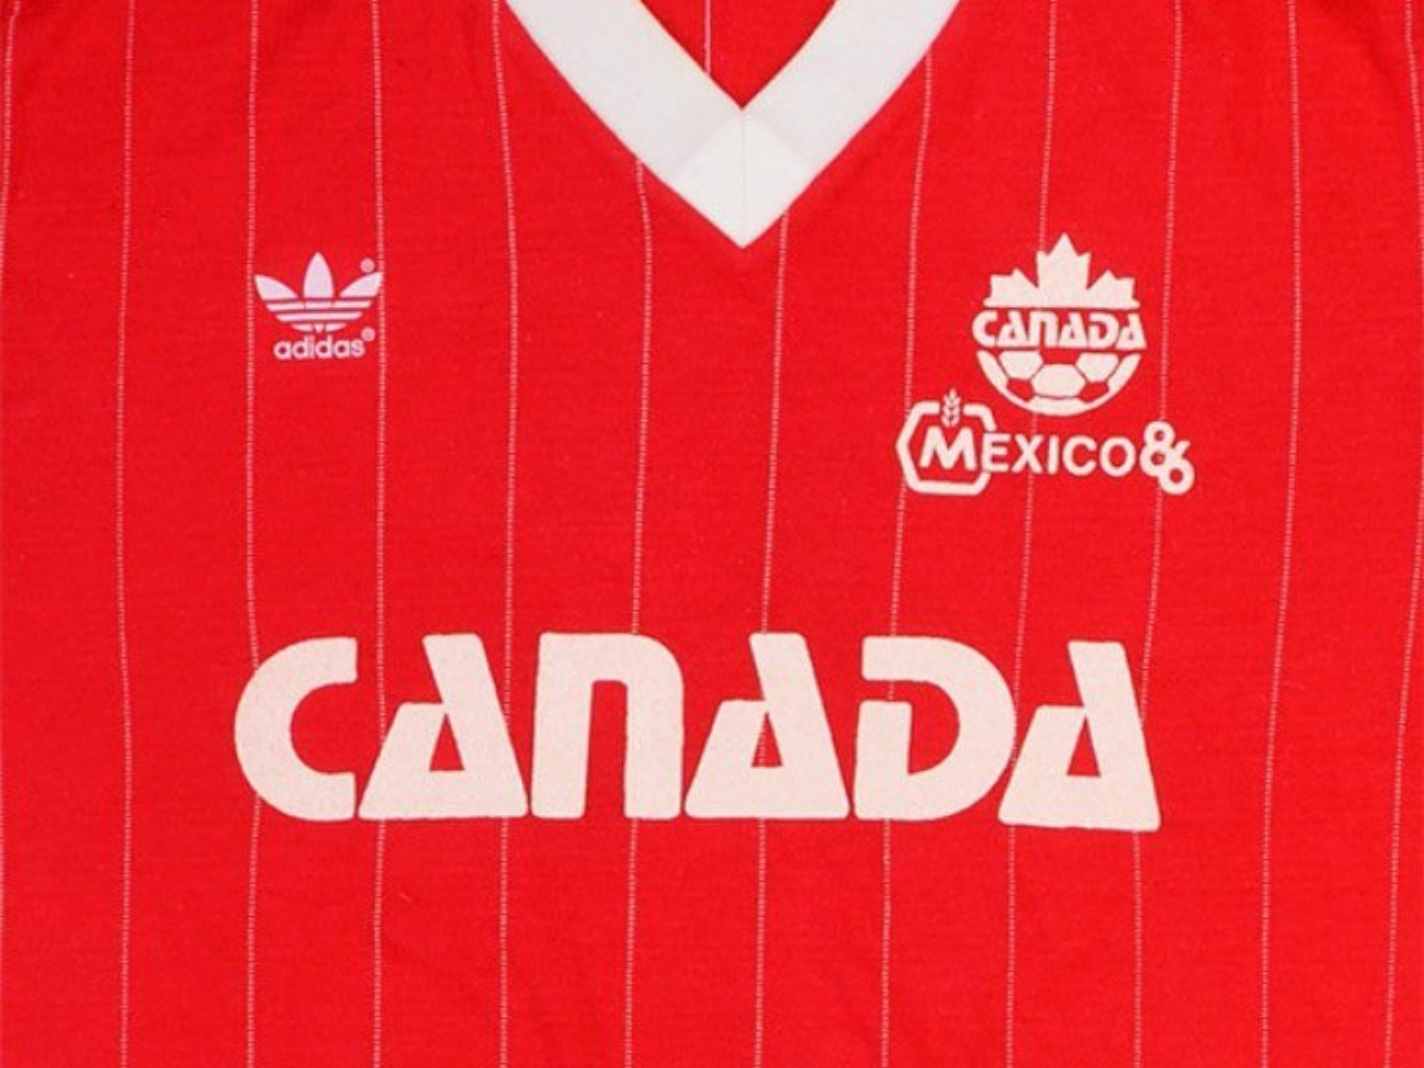 Canada 1986 World Cup home kit from Adidas